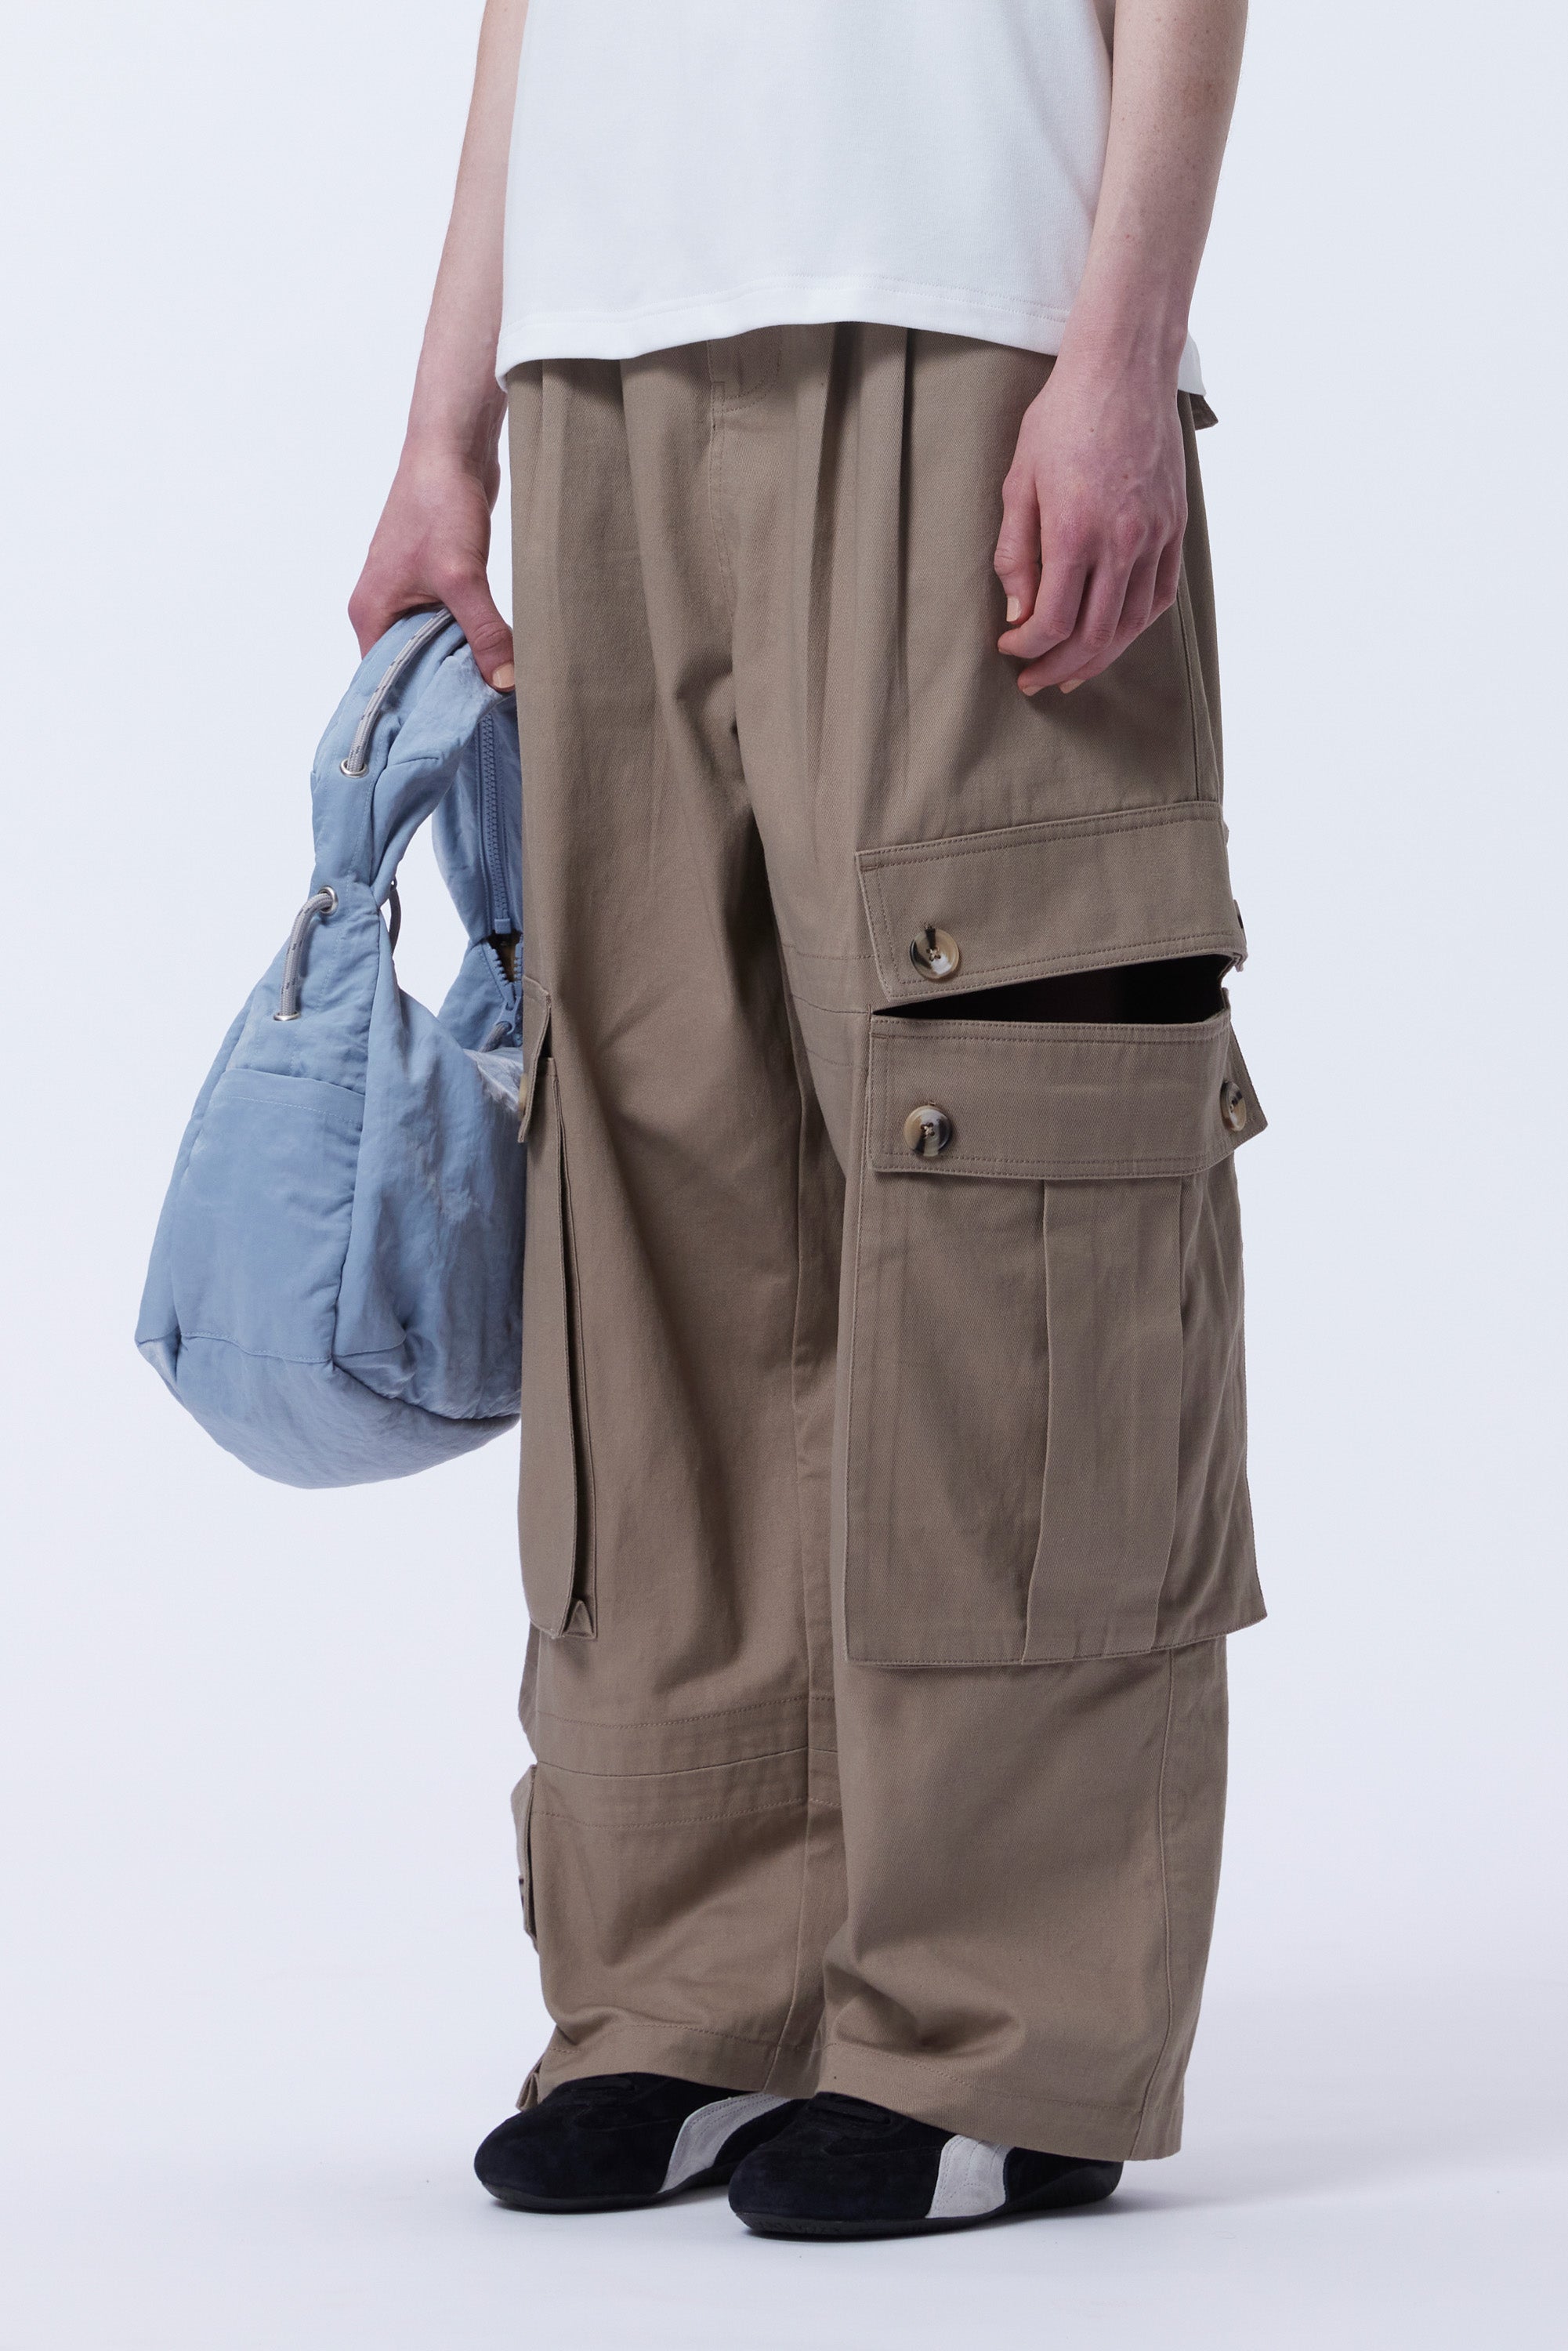 The CARGO BRI BRI PANT  available online with global shipping, and in PAM Stores Melbourne and Sydney.